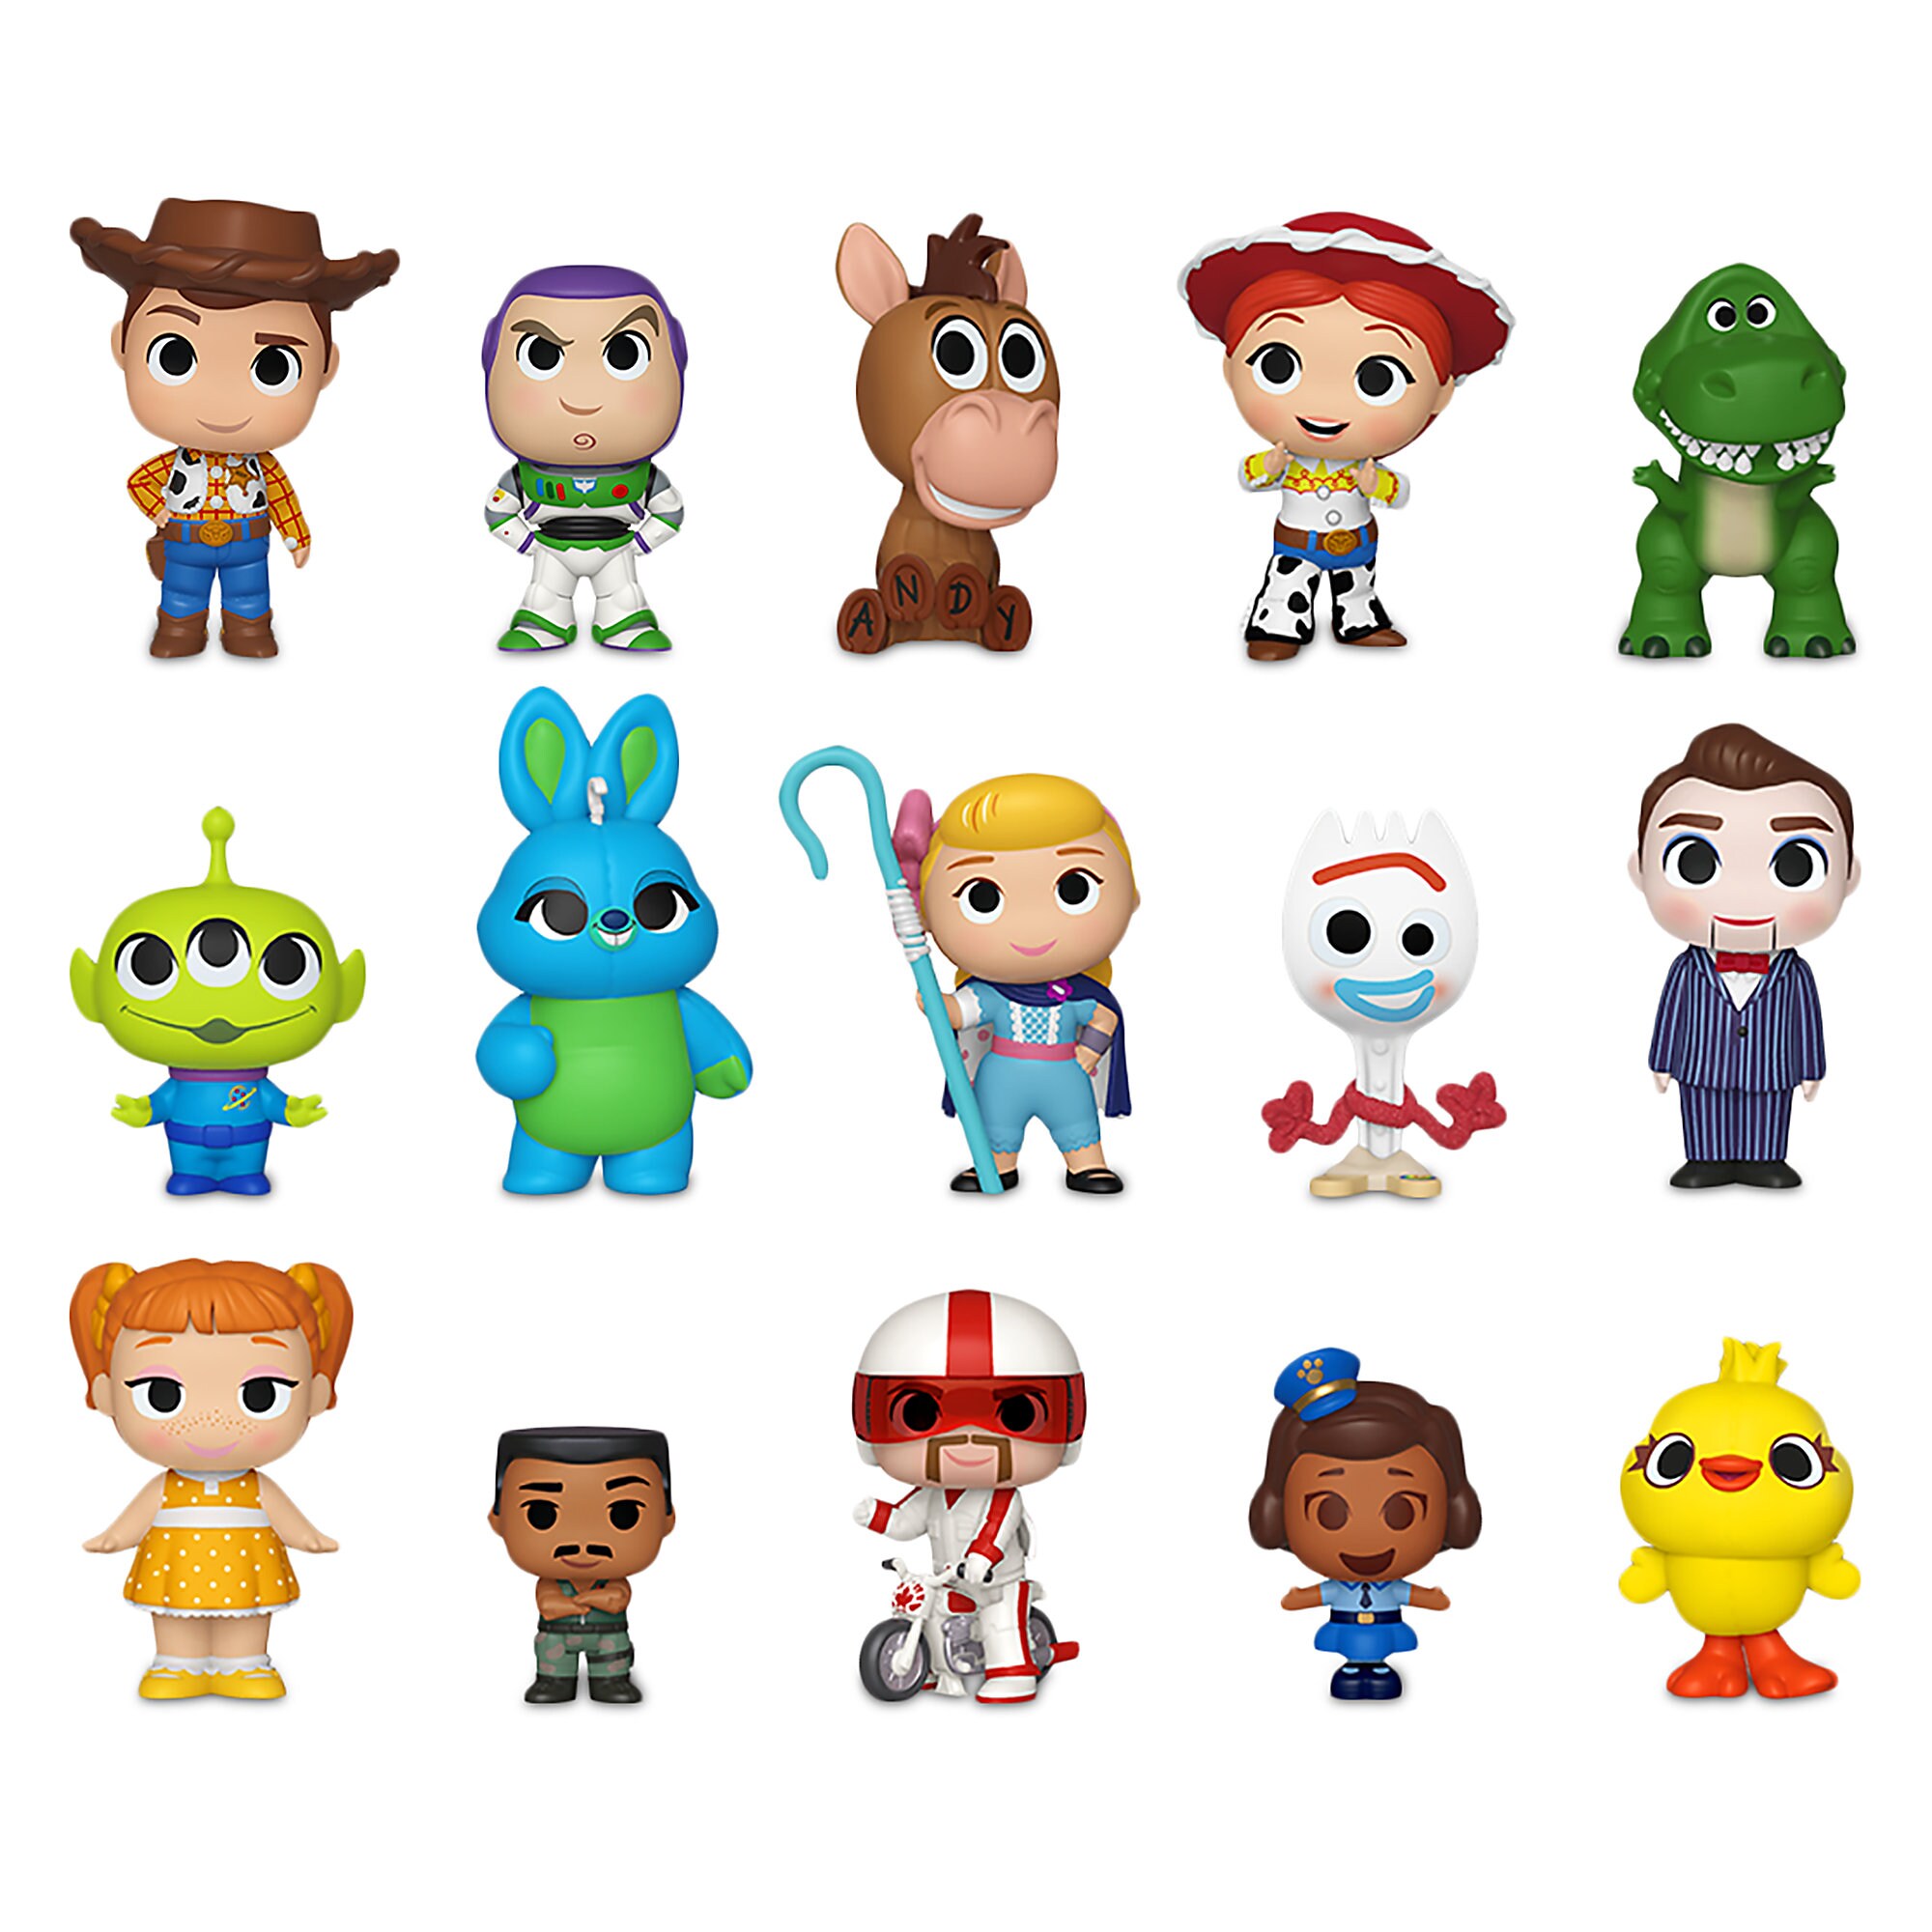 Toy story 4 Minis